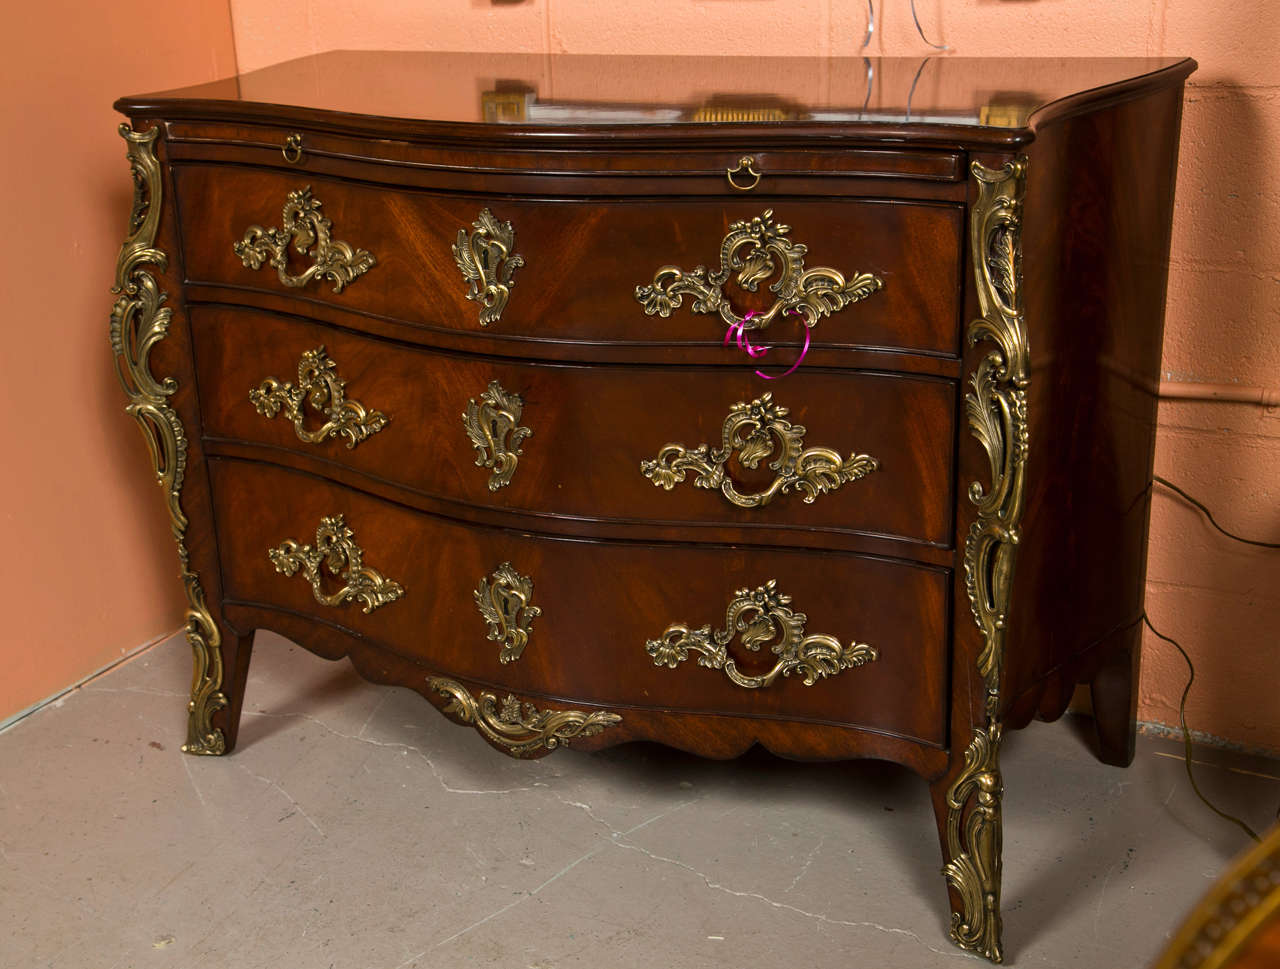 Pair of mahogany commodes by Ralph Lauren in the French Rococo taste, the serpentine top over a bombe form case fitted with three drawers, the top also has a pull-out tray, decorated with elaborate bronze mounts and handles, raised on splayed feet,